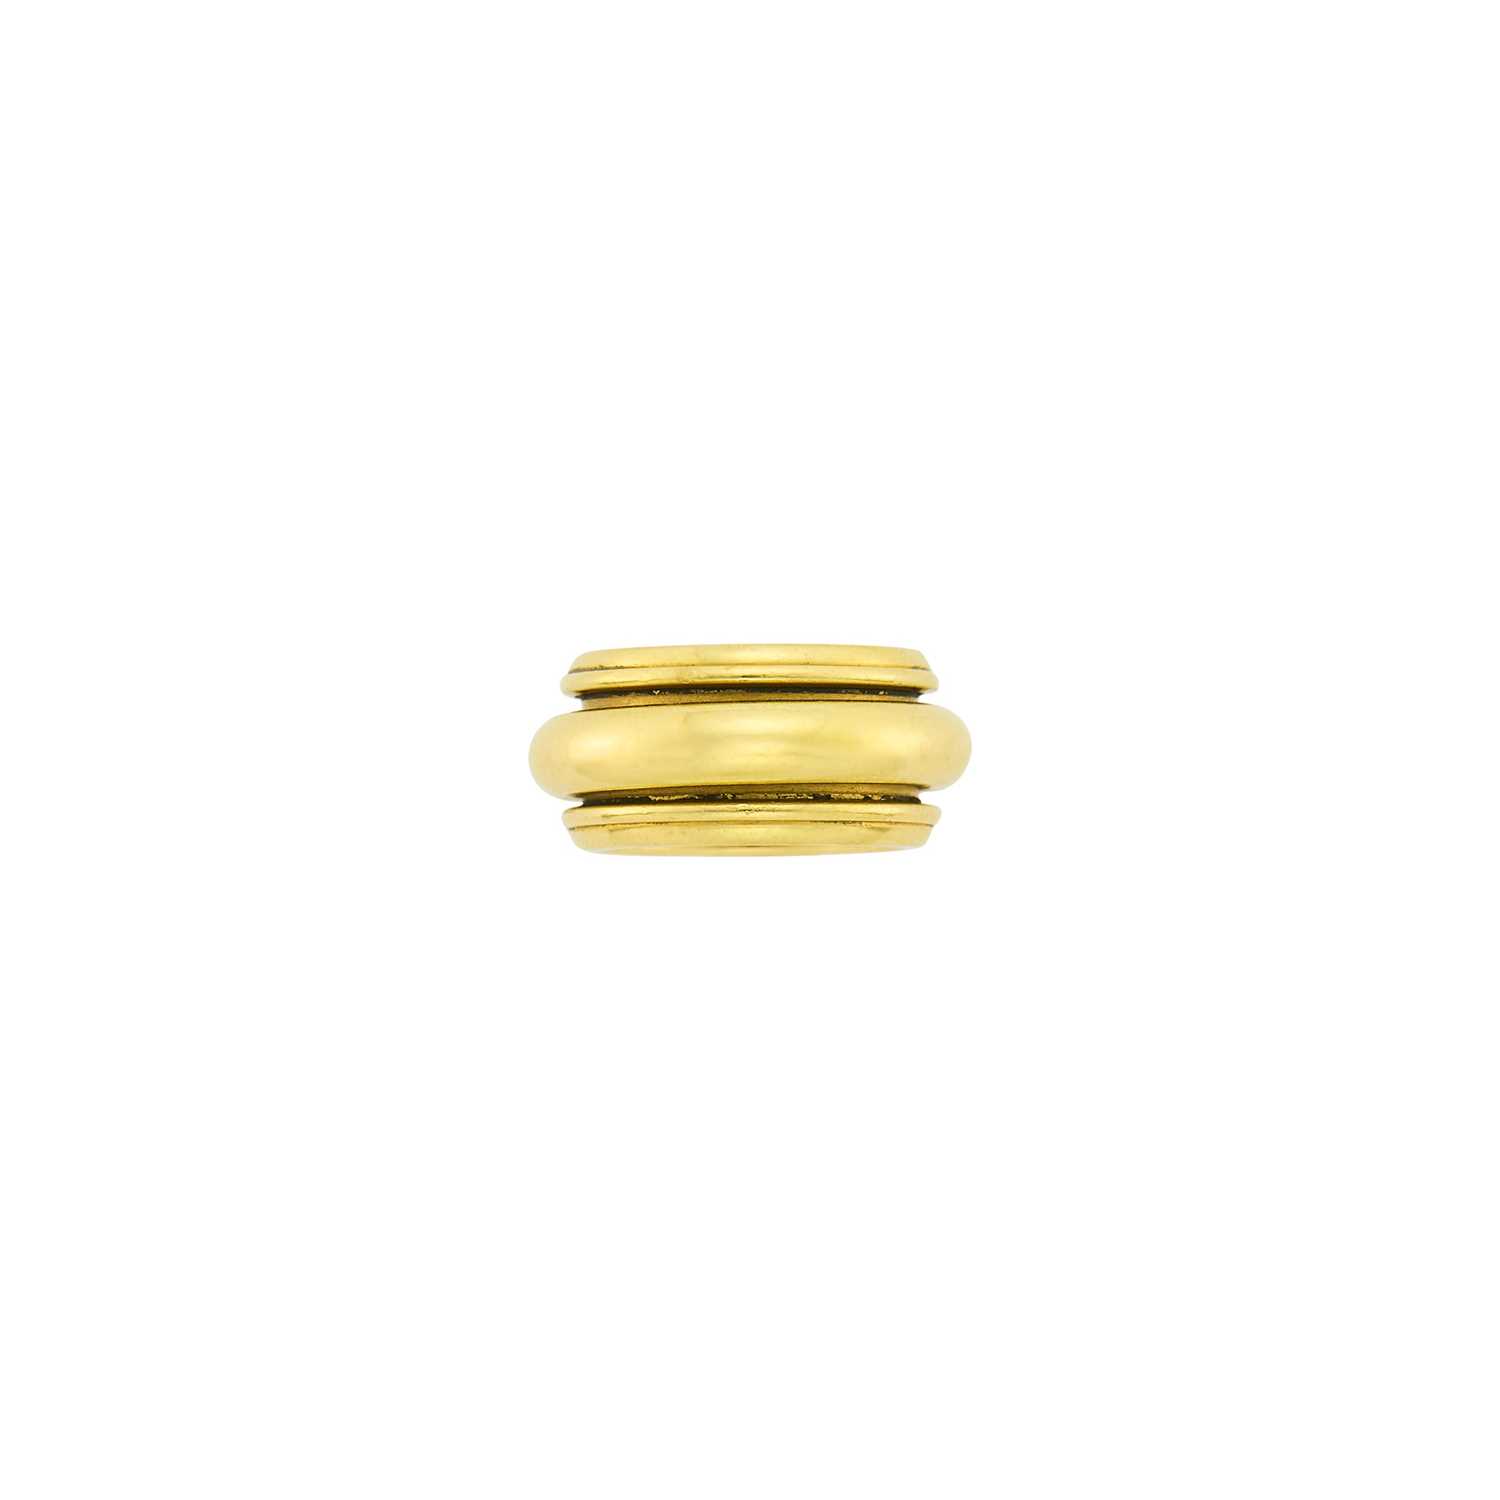 Lot 1087 - Piaget Wide Gold Rotating Band Ring